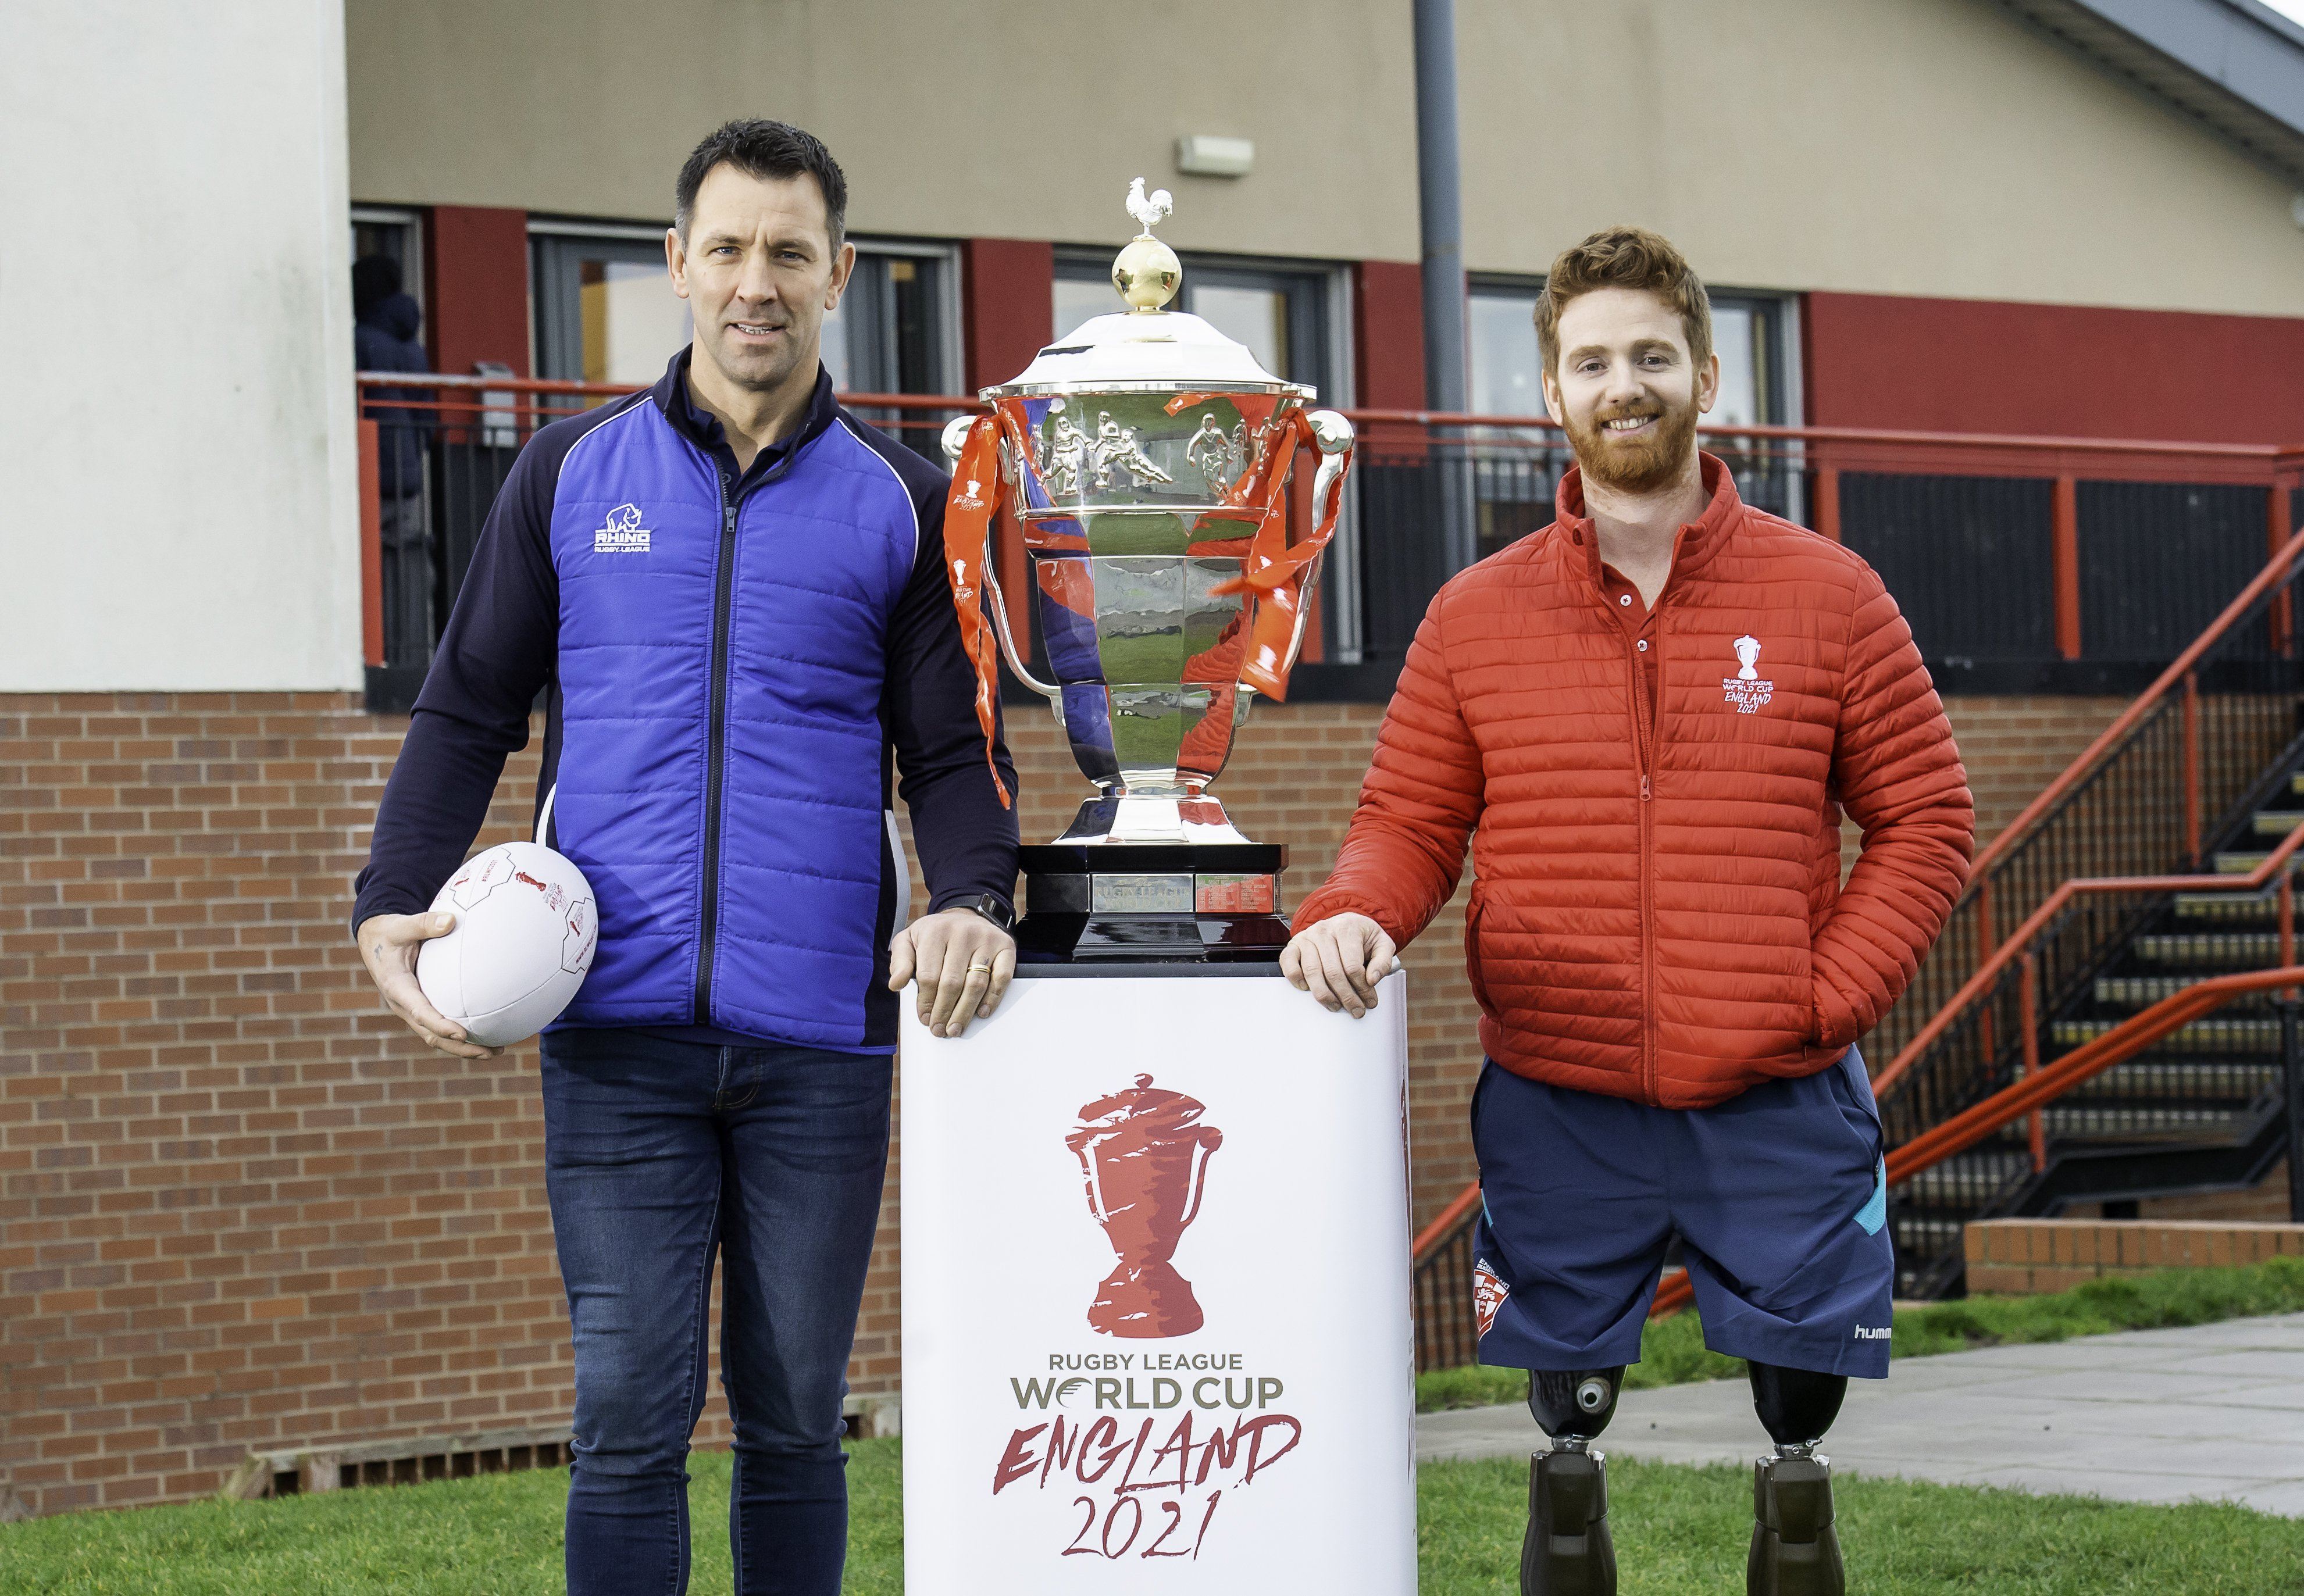 RHINO SIGNS UP FOR RUGBY LEAGUE WORLD CUP 2021 [RLWC2021] INSPIRATIONALL PROGRAMME